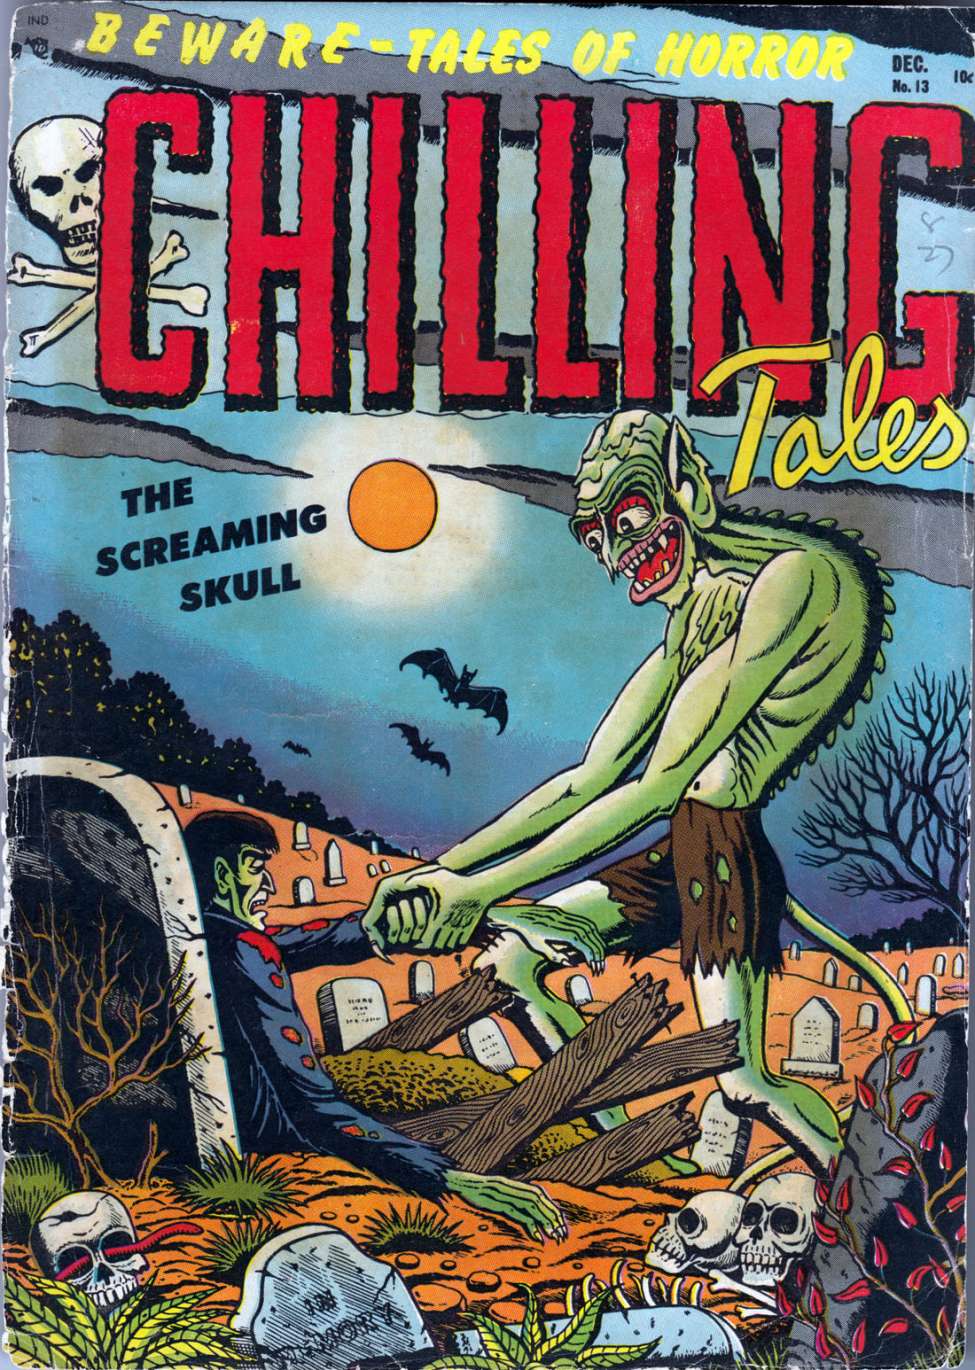 Book Cover For Chilling Tales 13